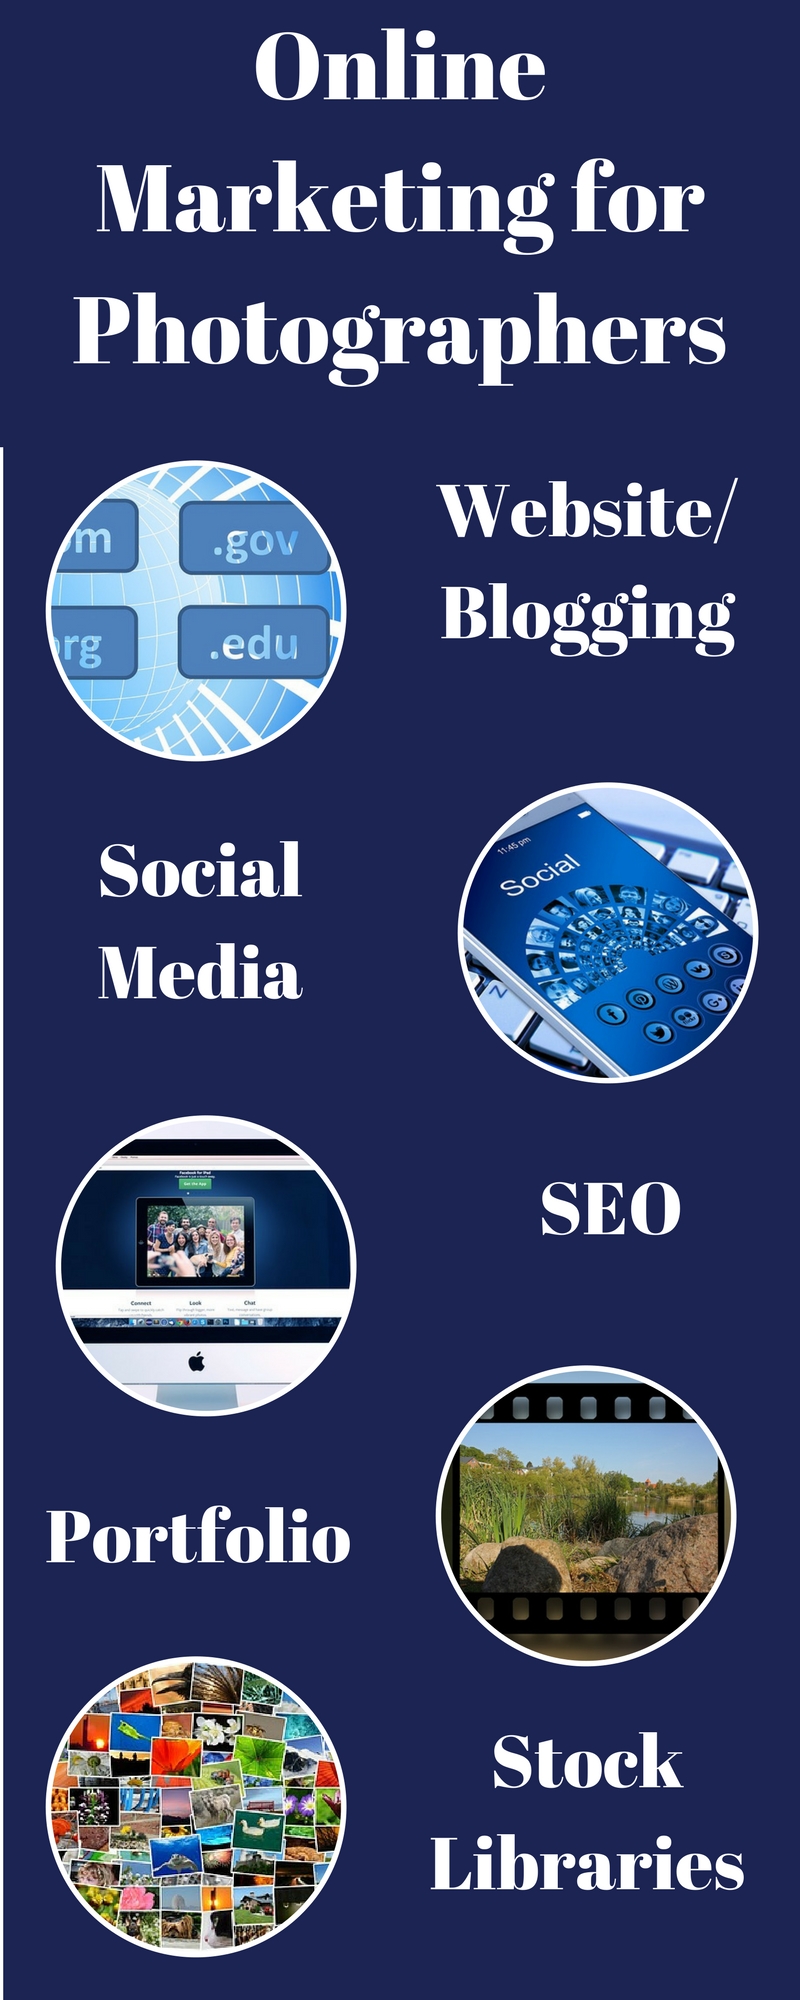 online marketing for photographers infographic